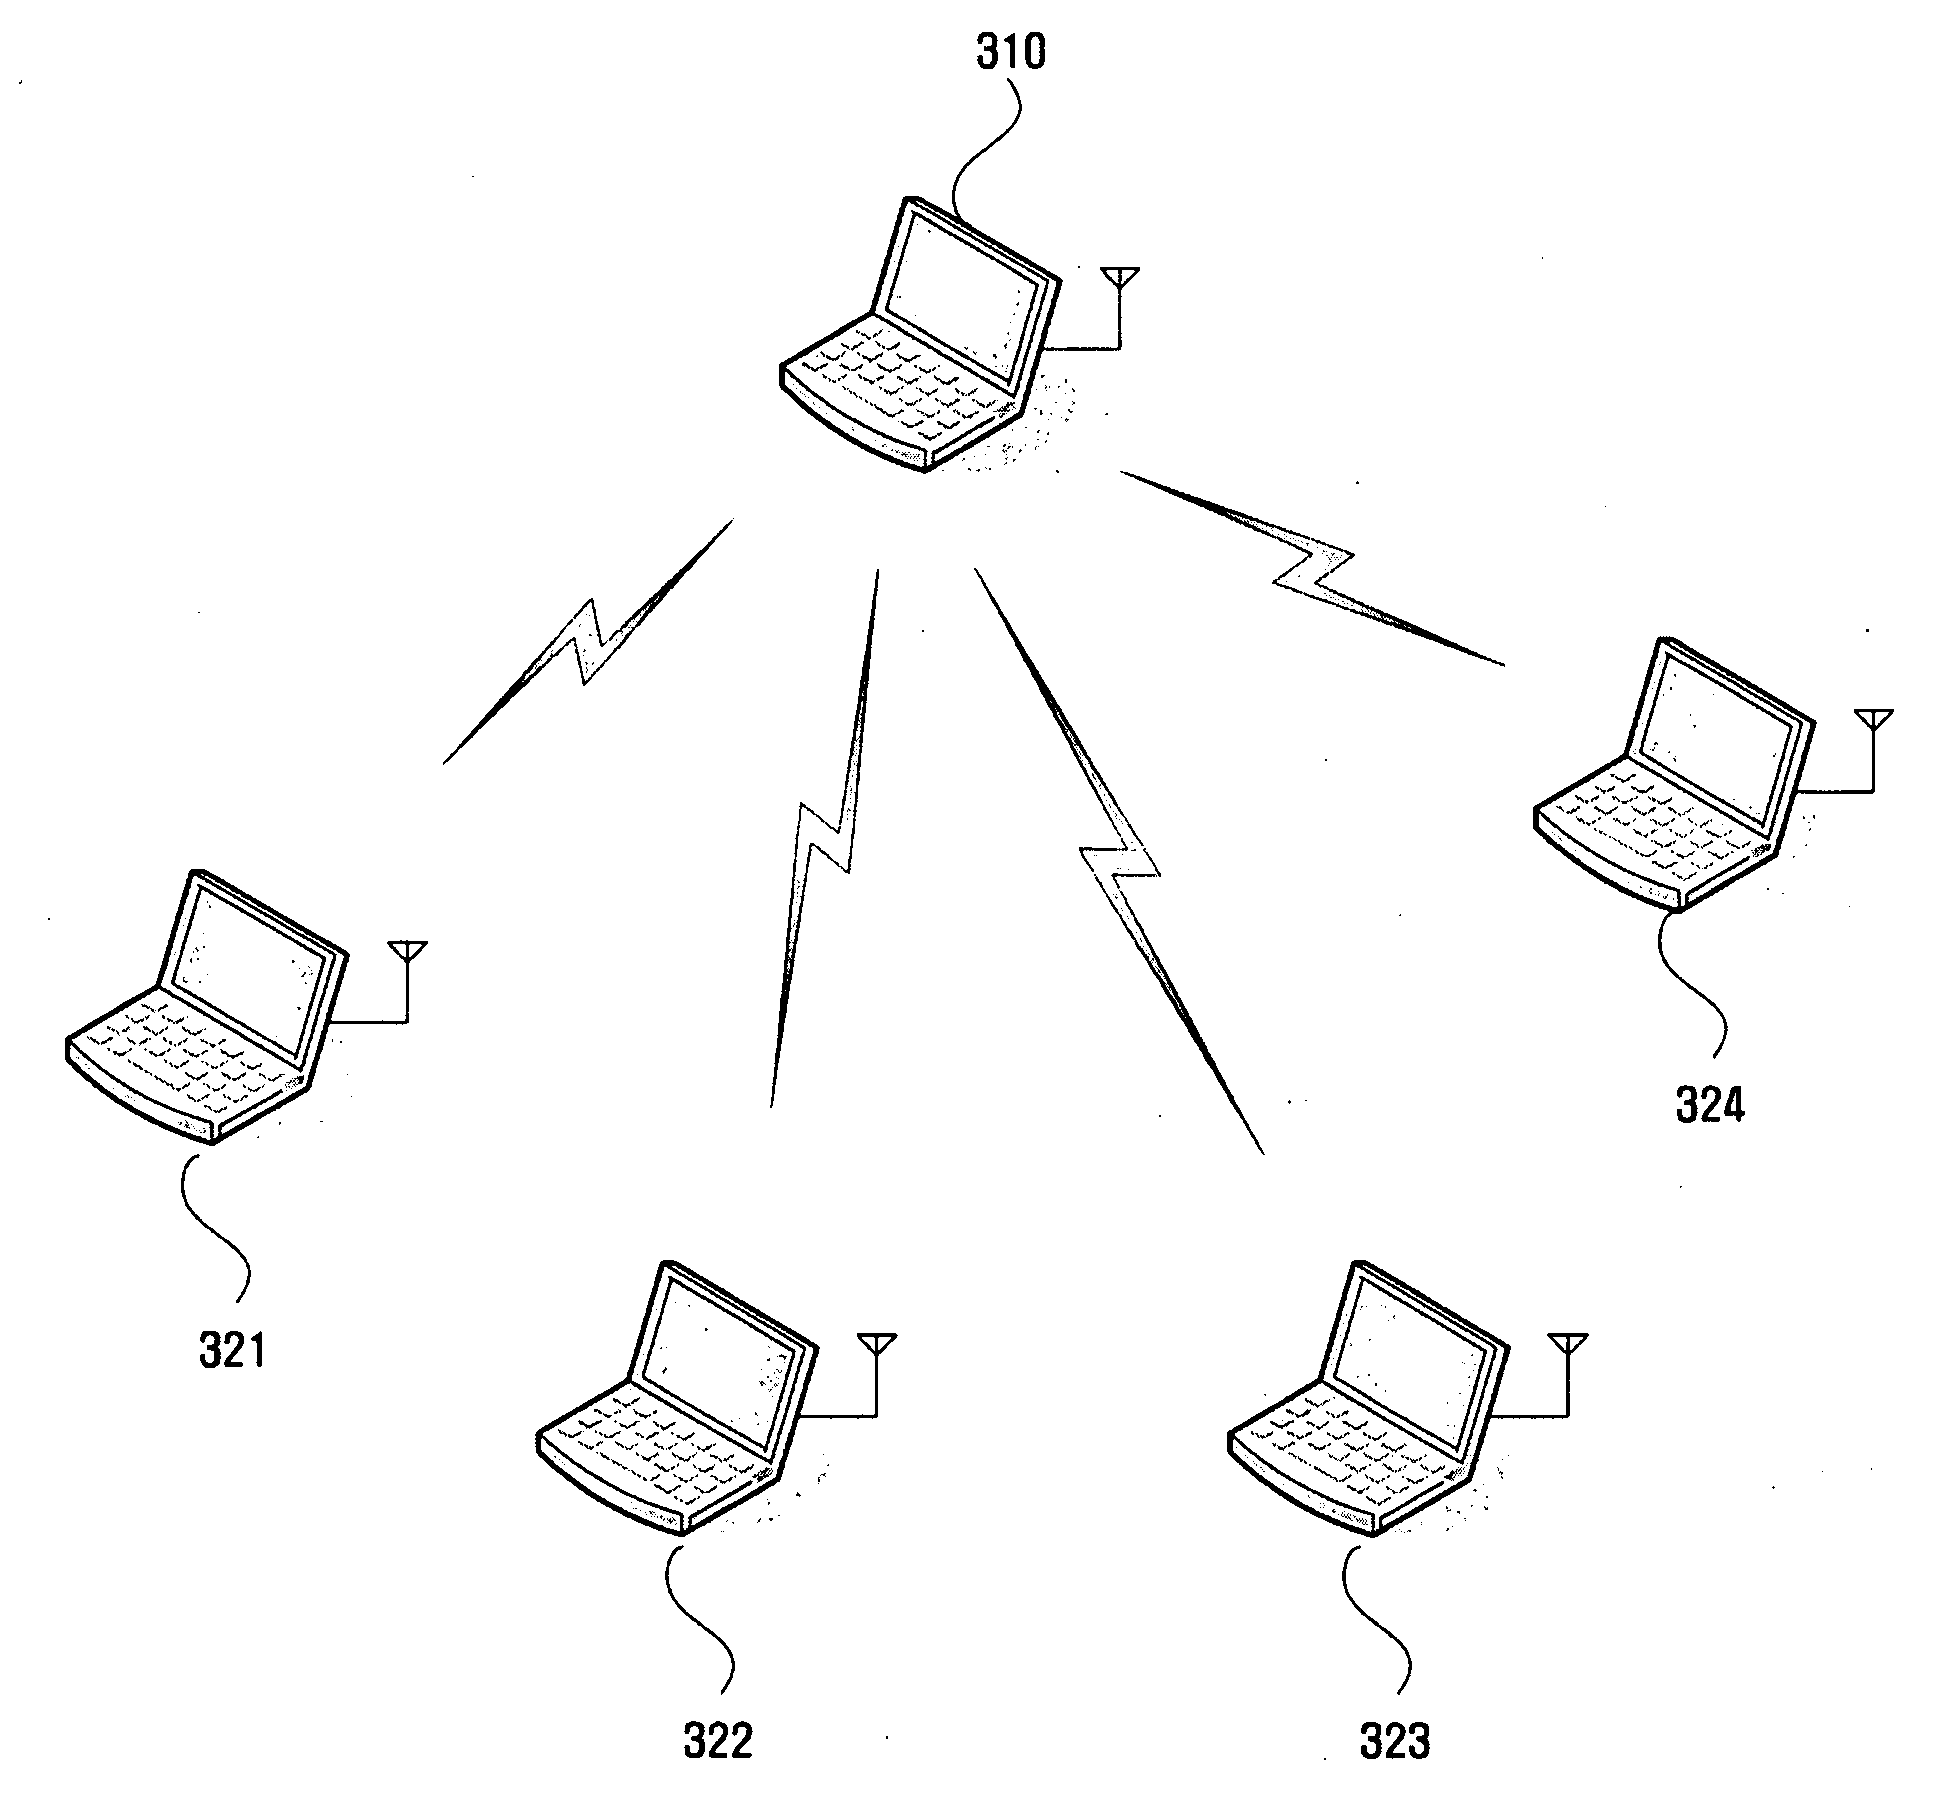 Wireless network system and method for transmitting and receiving data in the wireless network